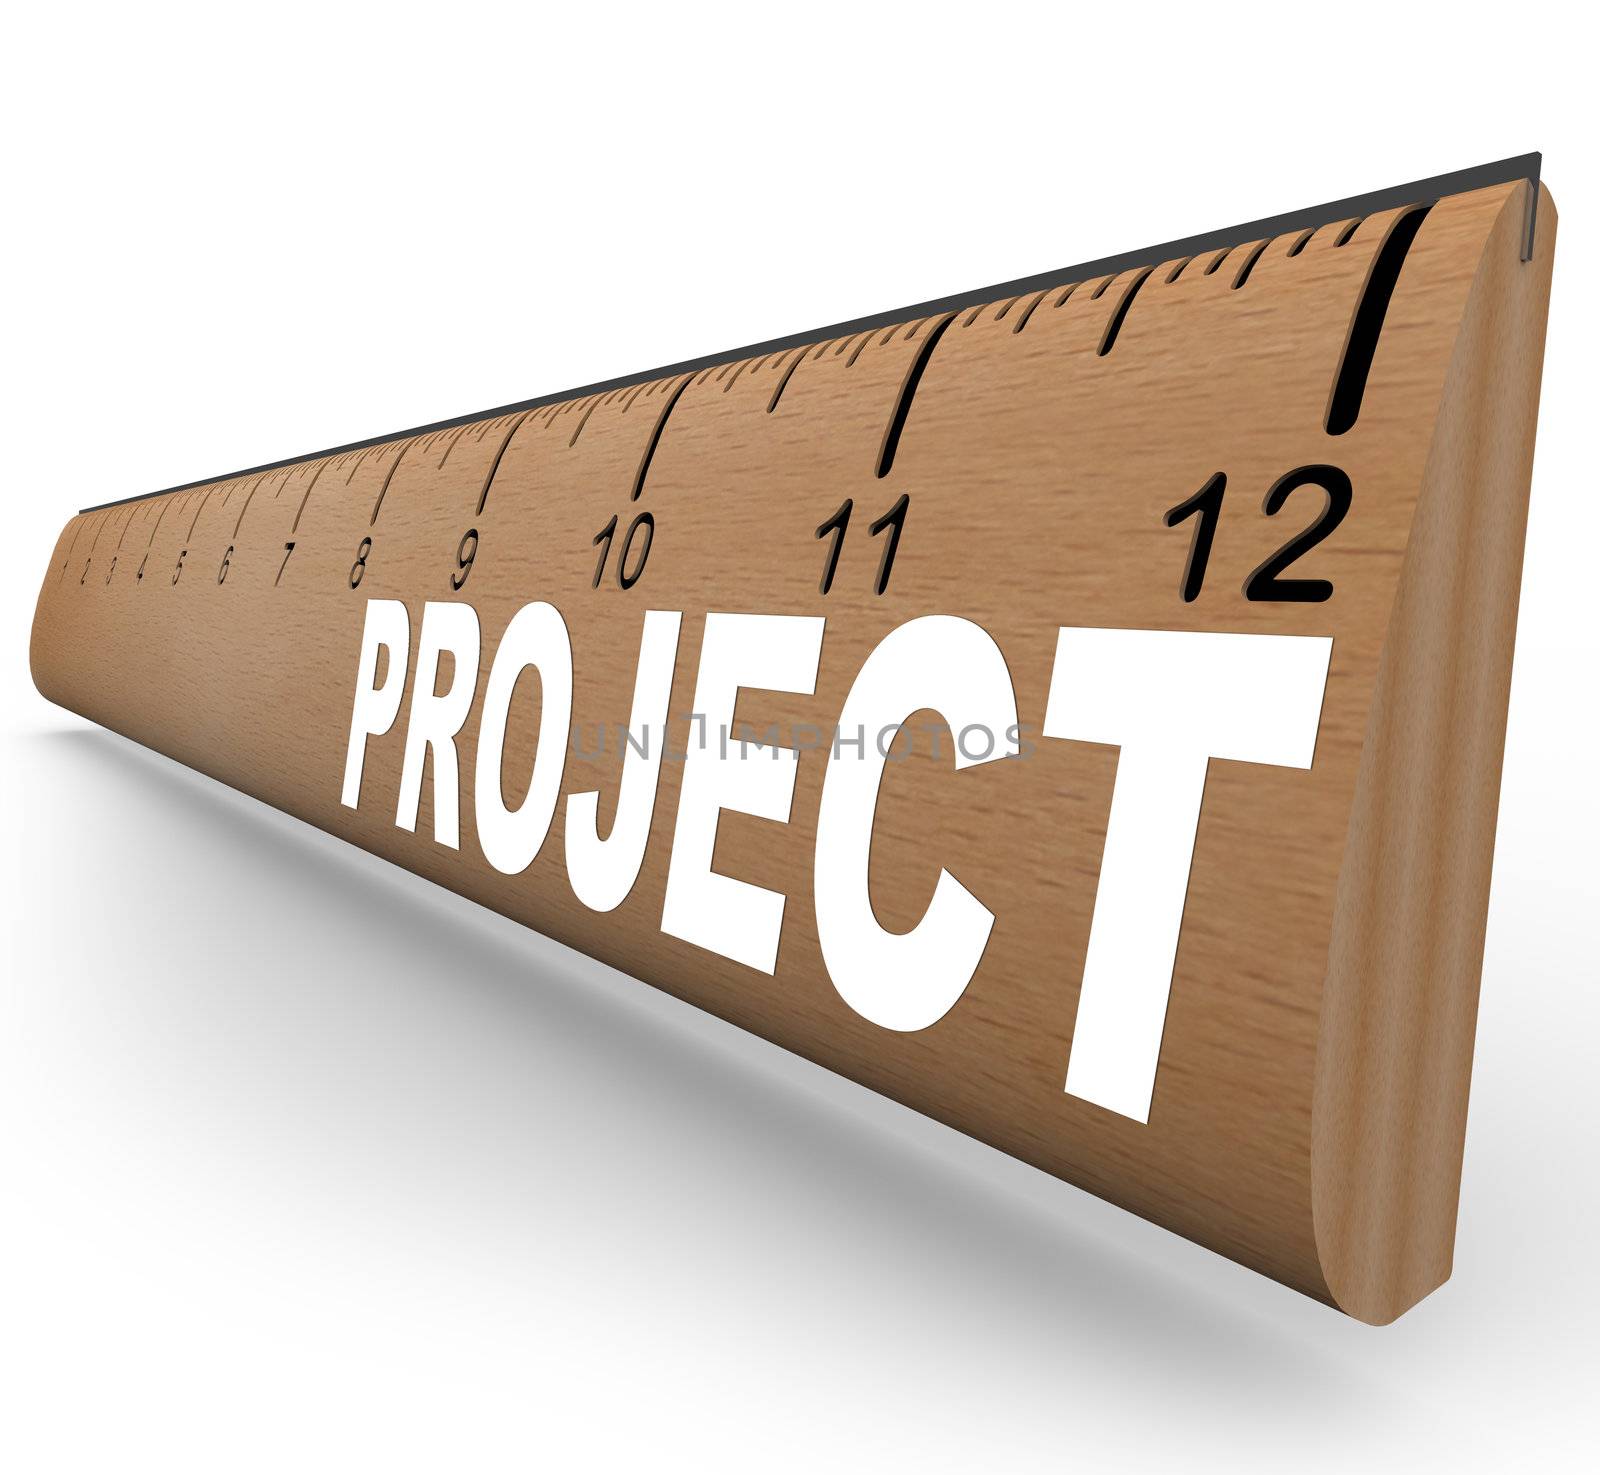 A wooden ruler with the word Project representing an assignment for school homework or an arts and crafts job you are working on